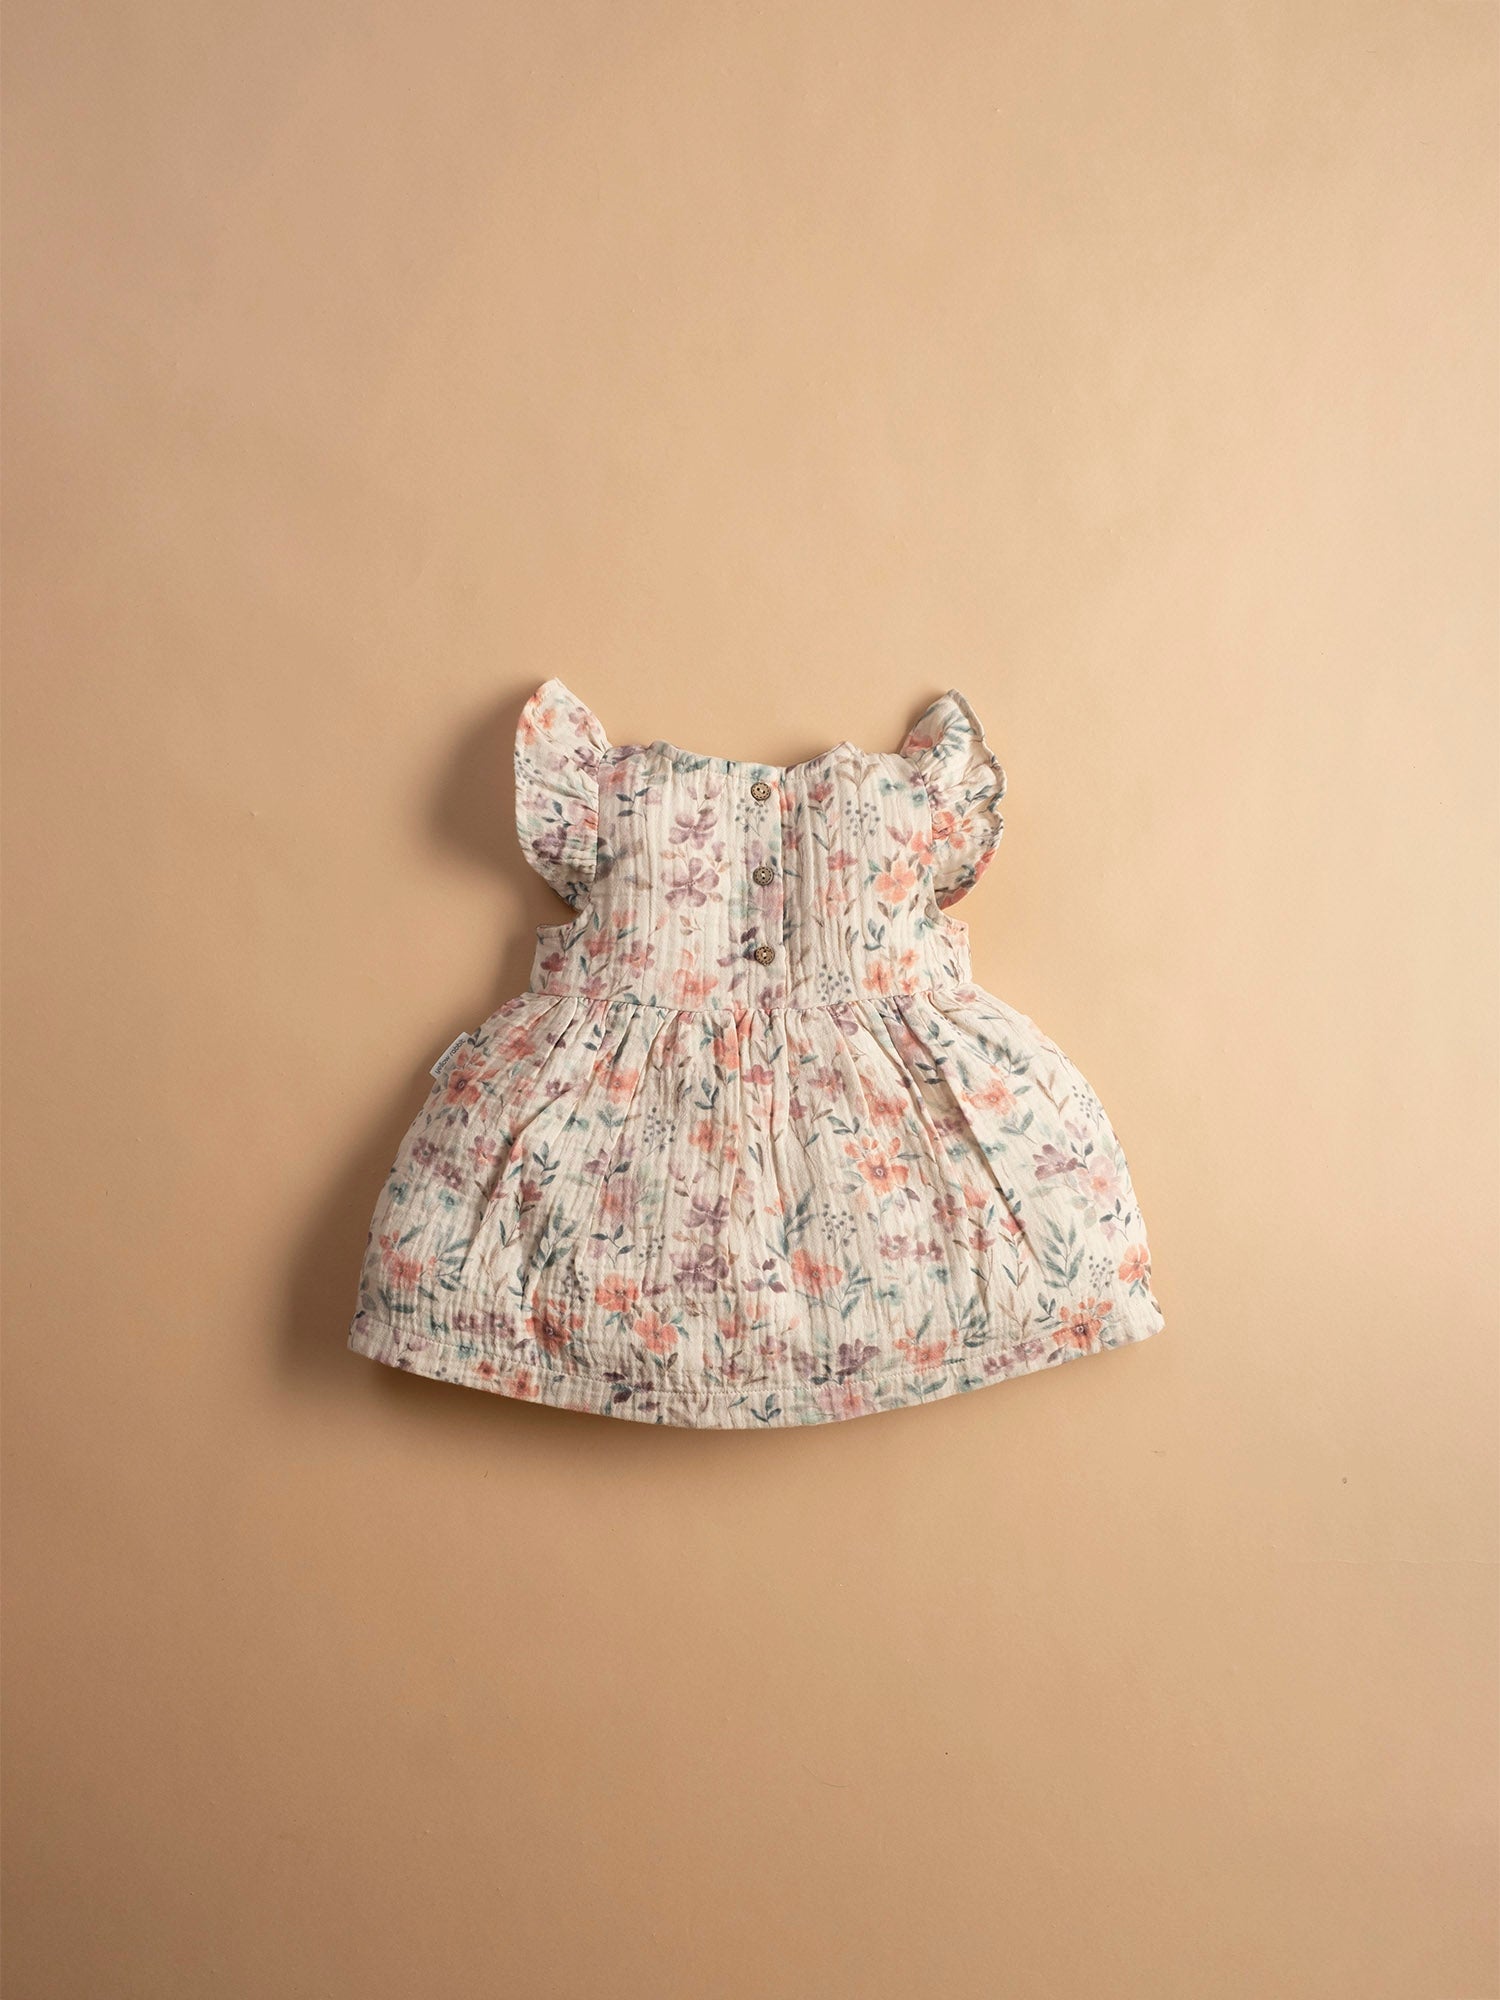 Vintage floral baby ruffle dress